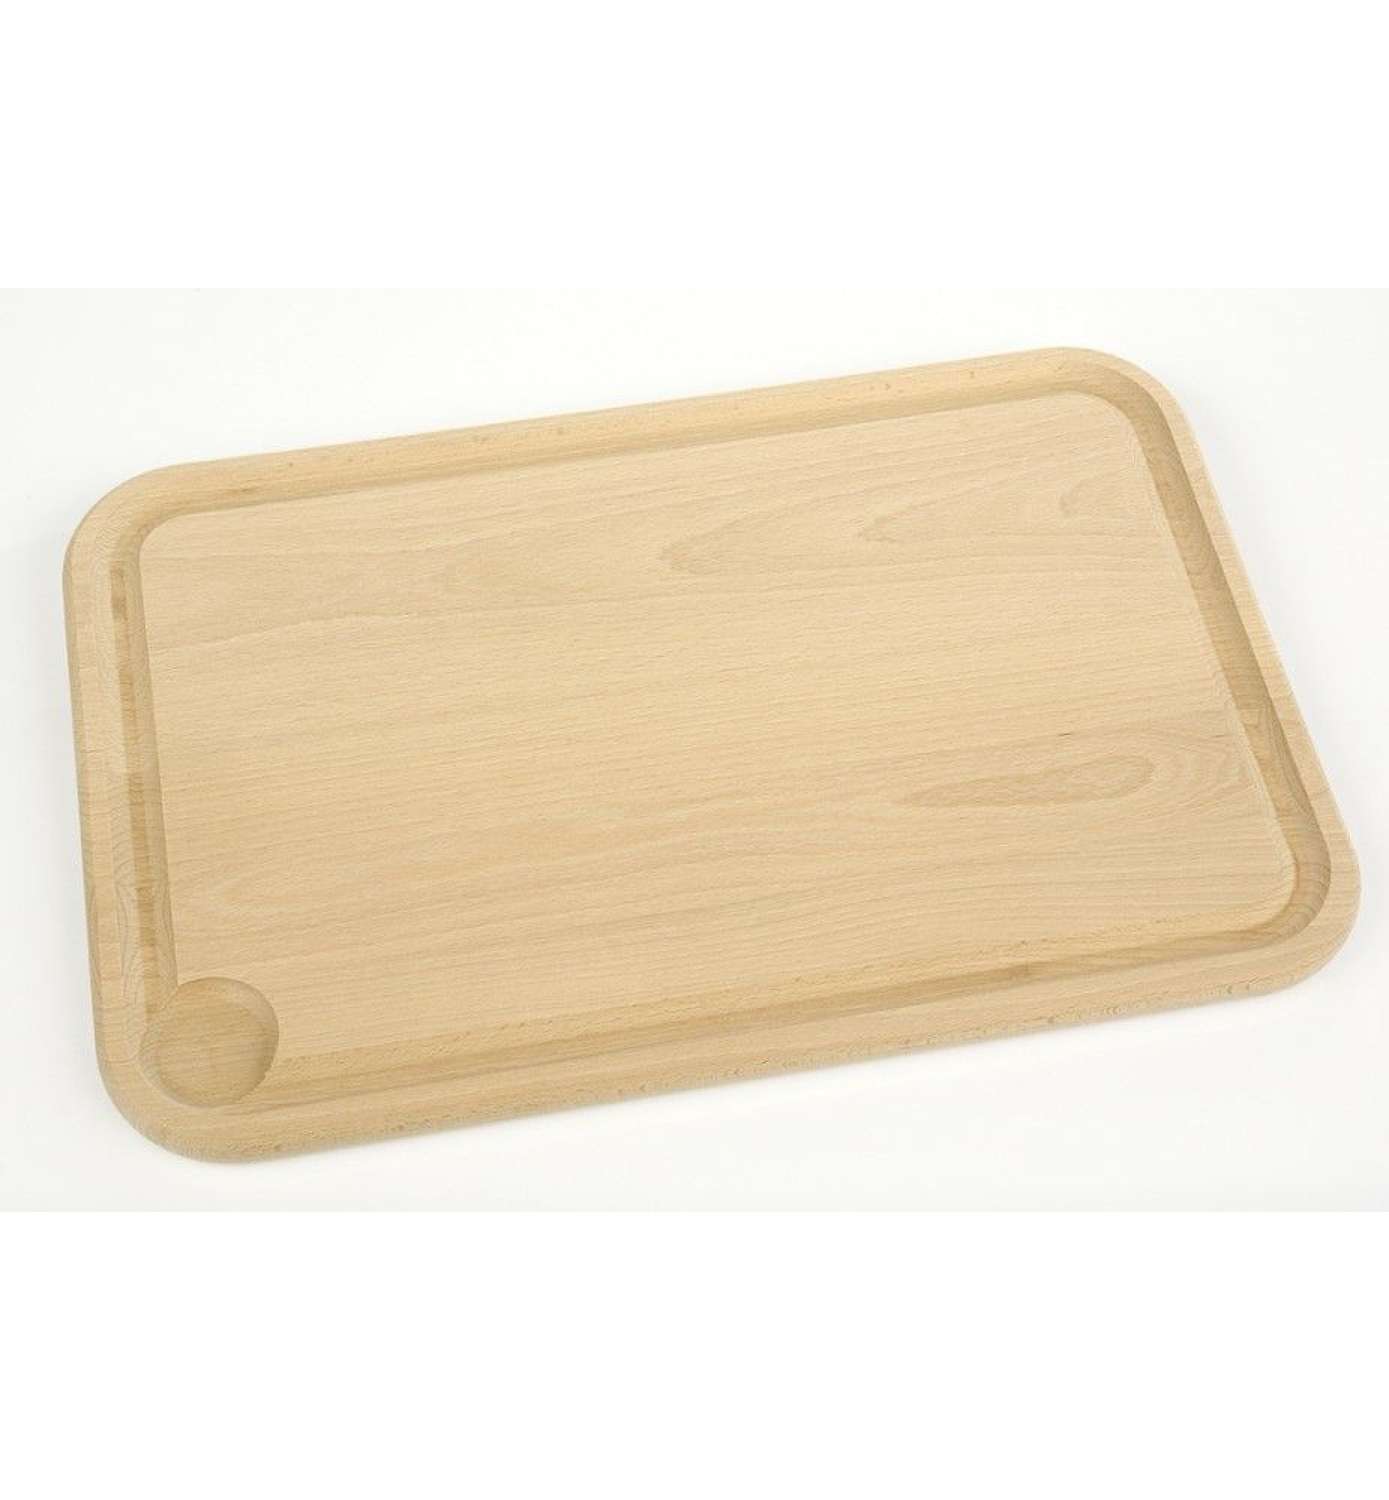 Berard Beech Carving Board with Grooved Edge - Medium